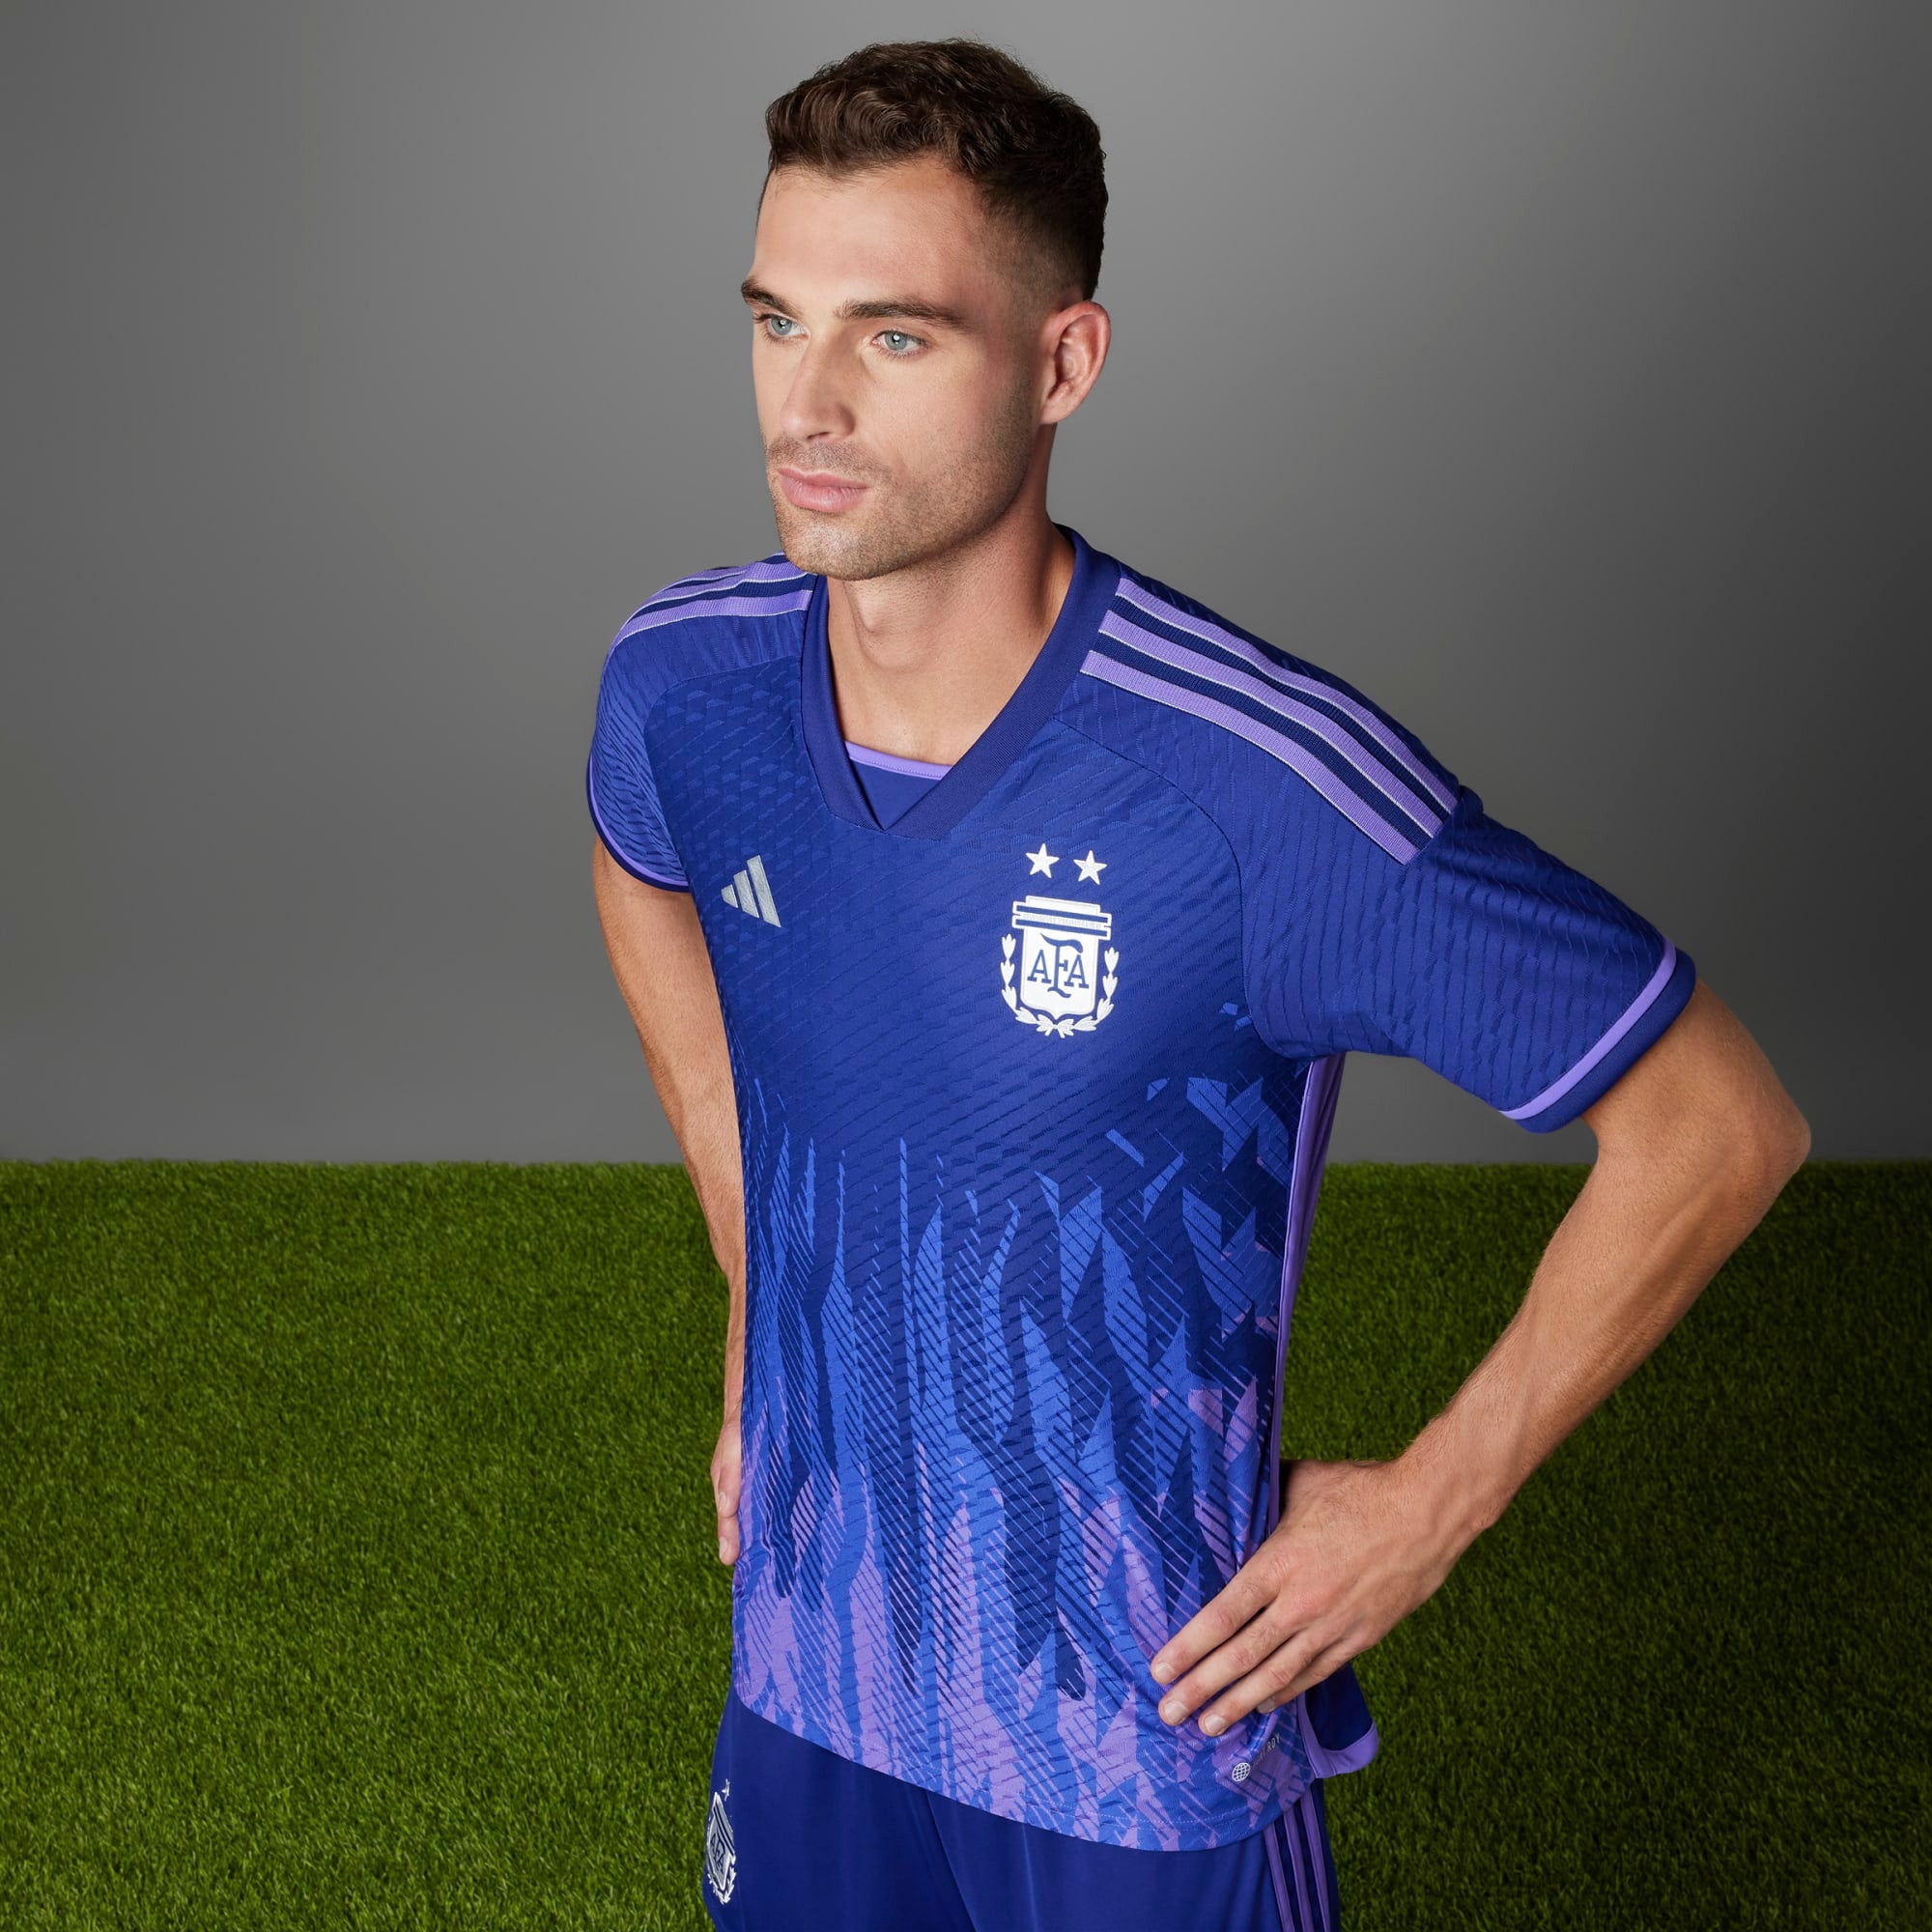 adidas Argentina 2024 Away Authentic Jersey - Blue, Men's Soccer